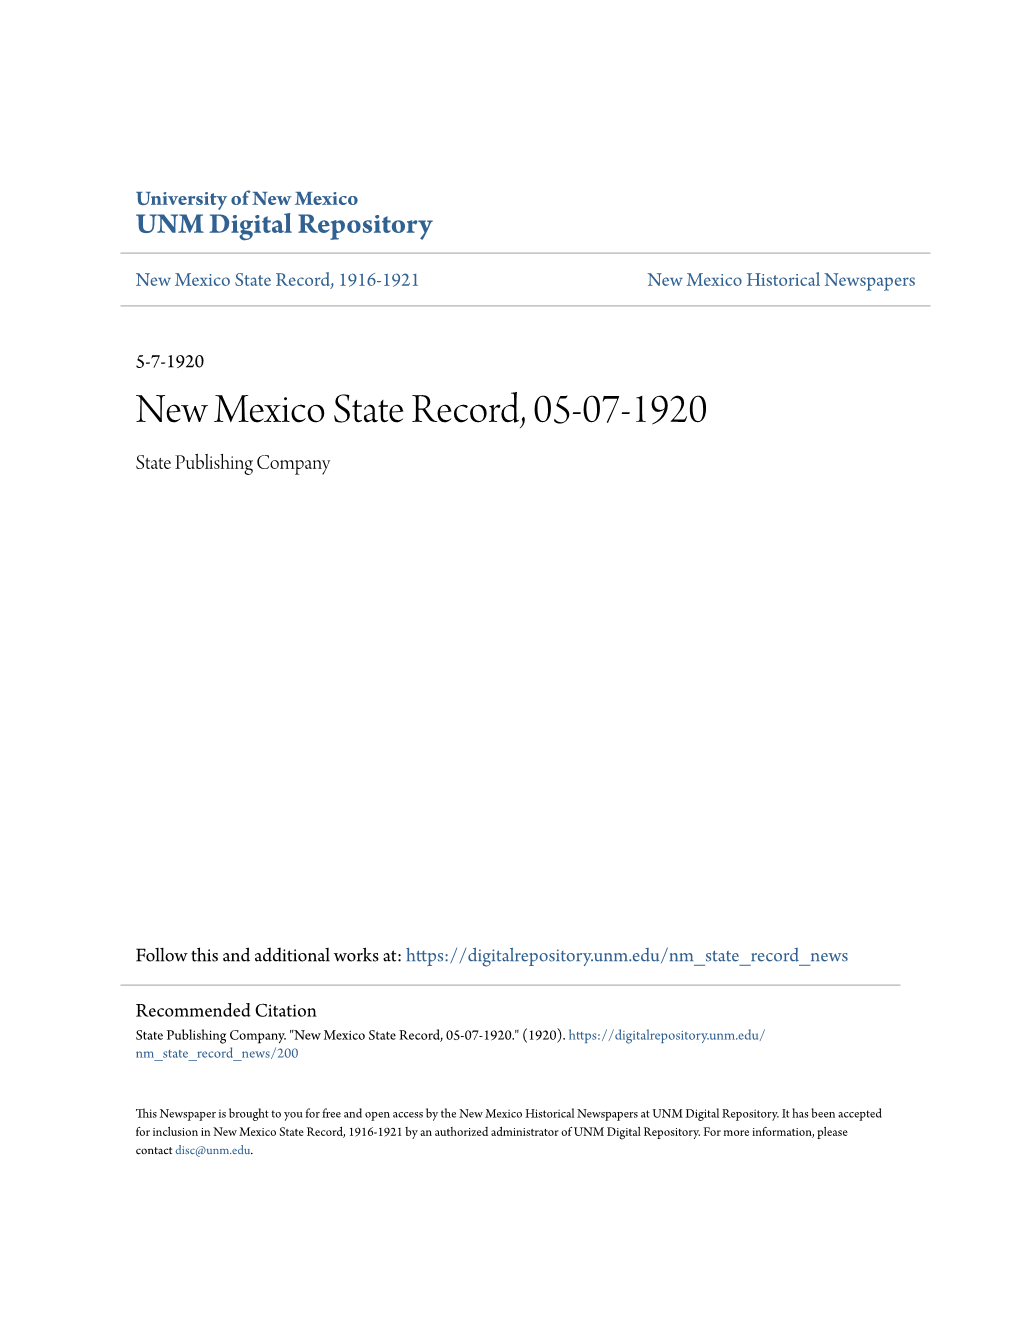 New Mexico State Record, 05-07-1920 State Publishing Company